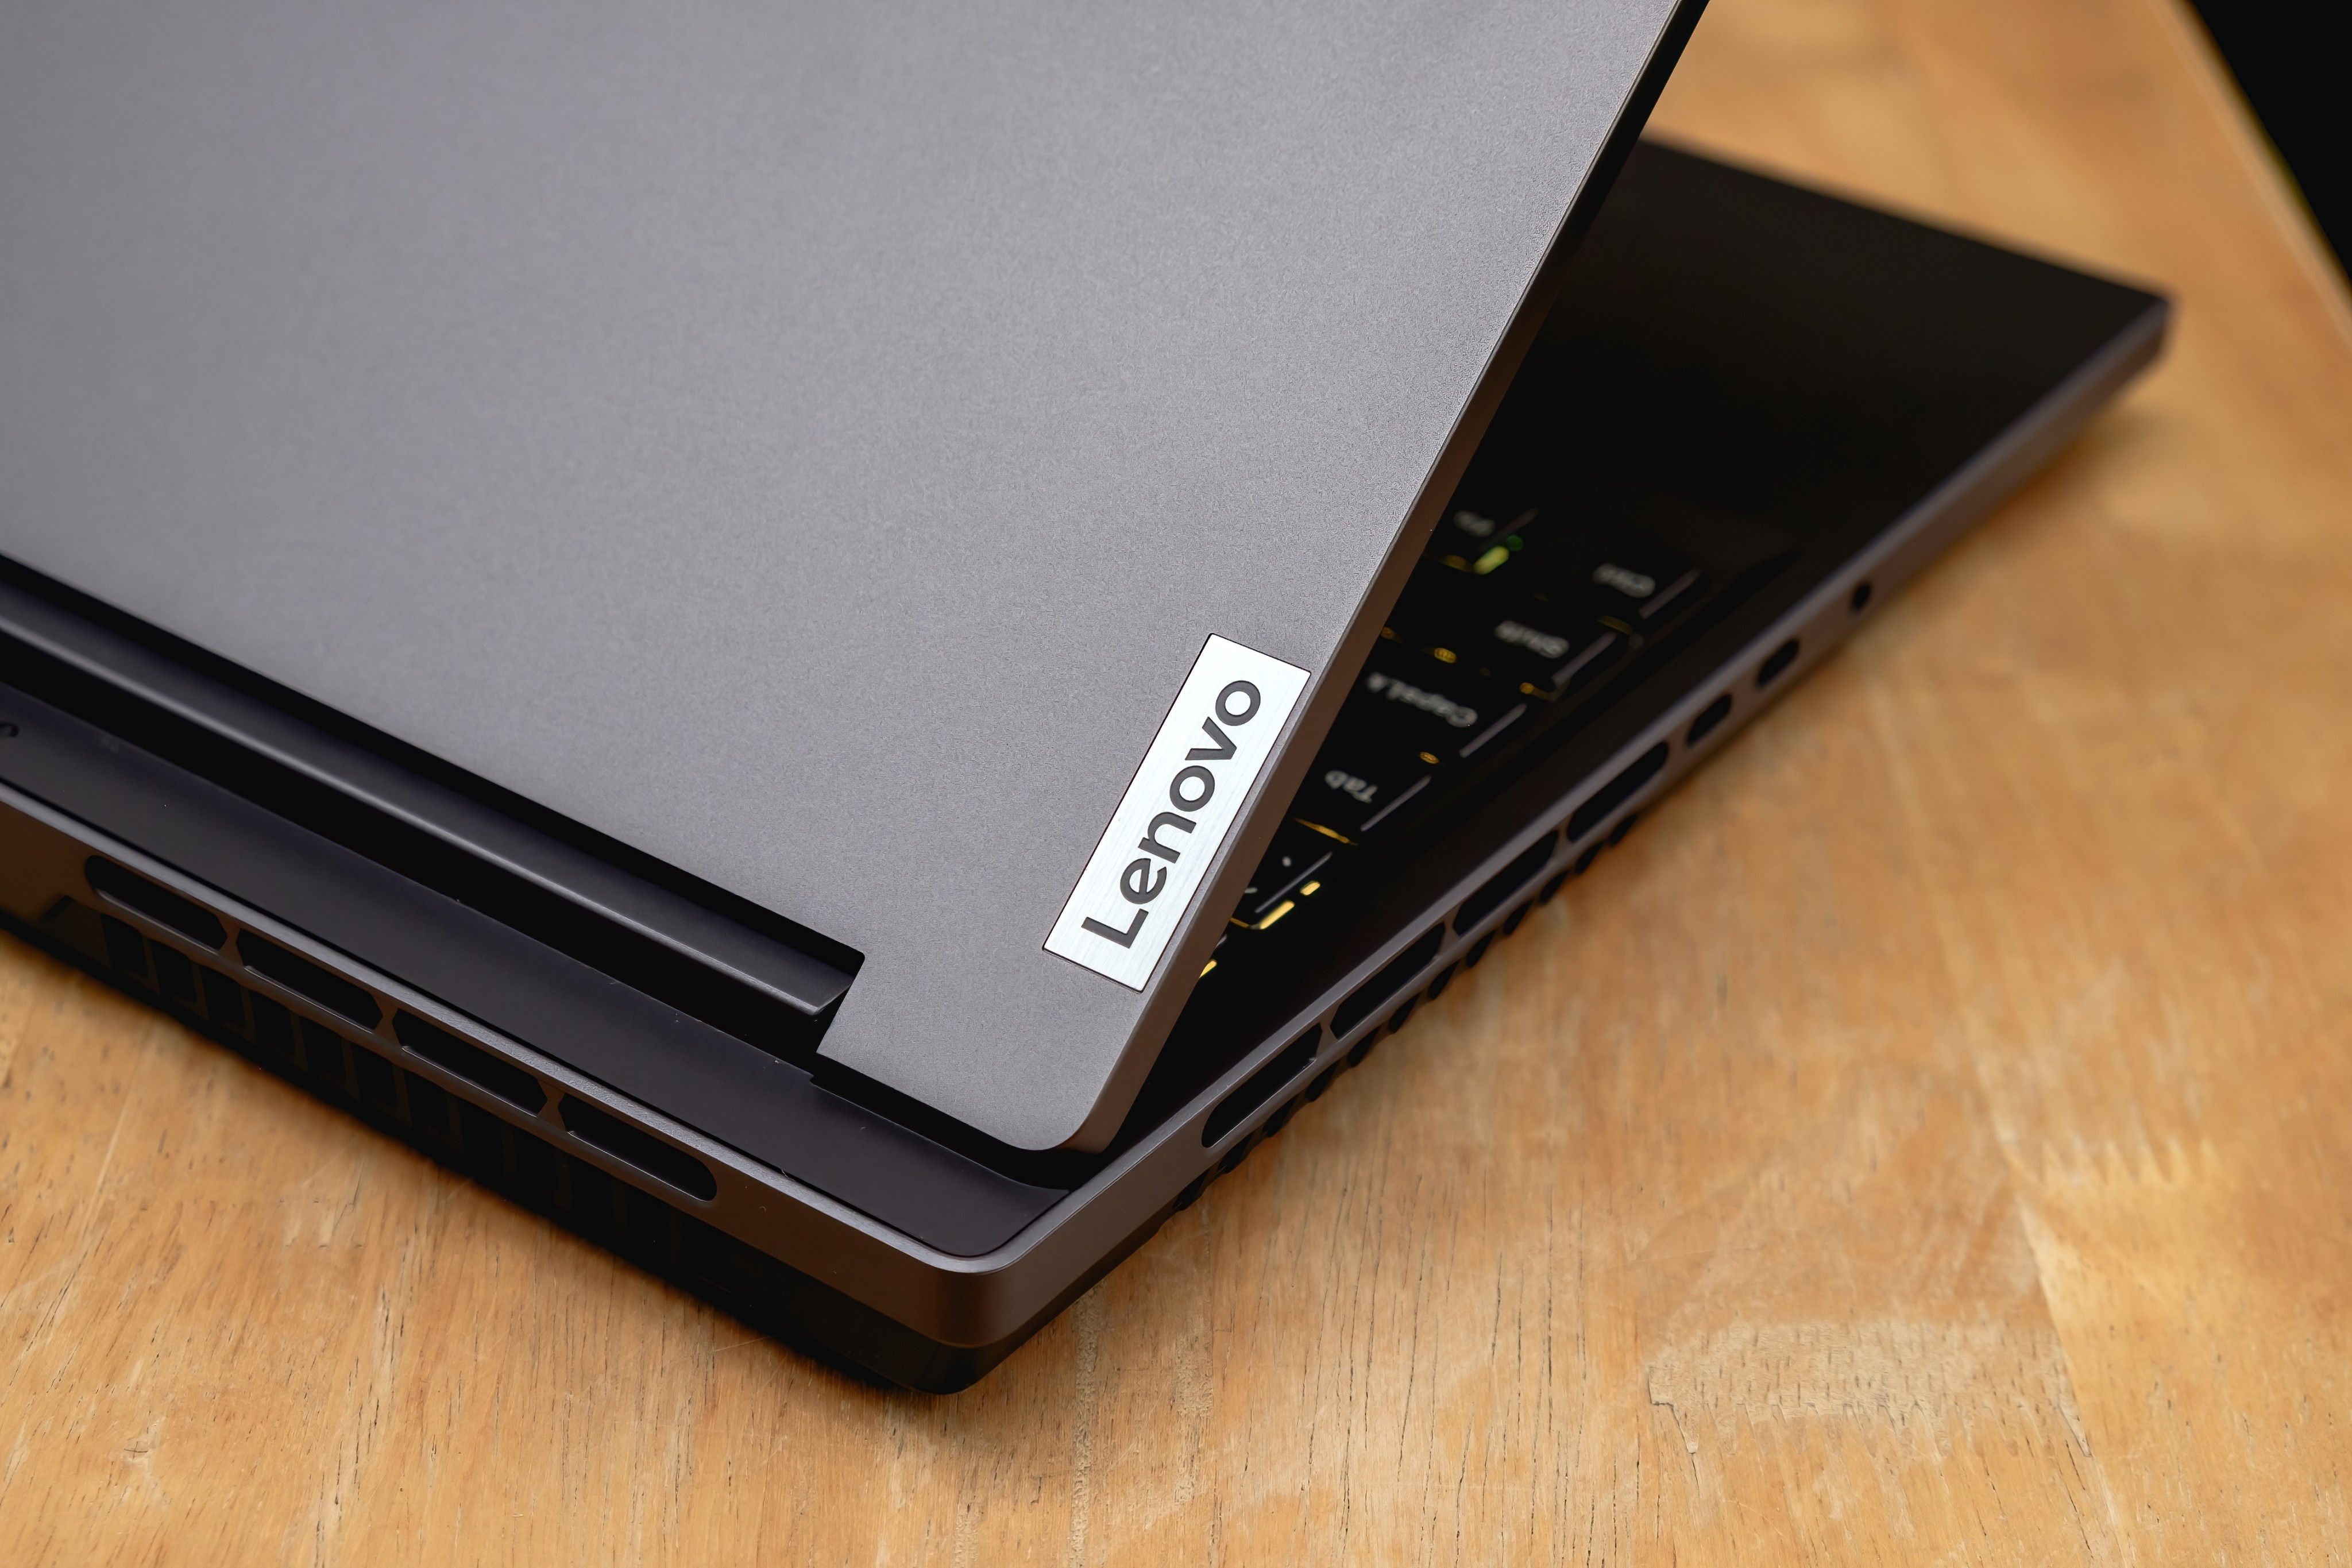 Computer giant Lenovo Group’s revenue rose 3 per cent year on year to a better-than-expected US$15.7 billion in the December quarter. Photo: Shutterstock